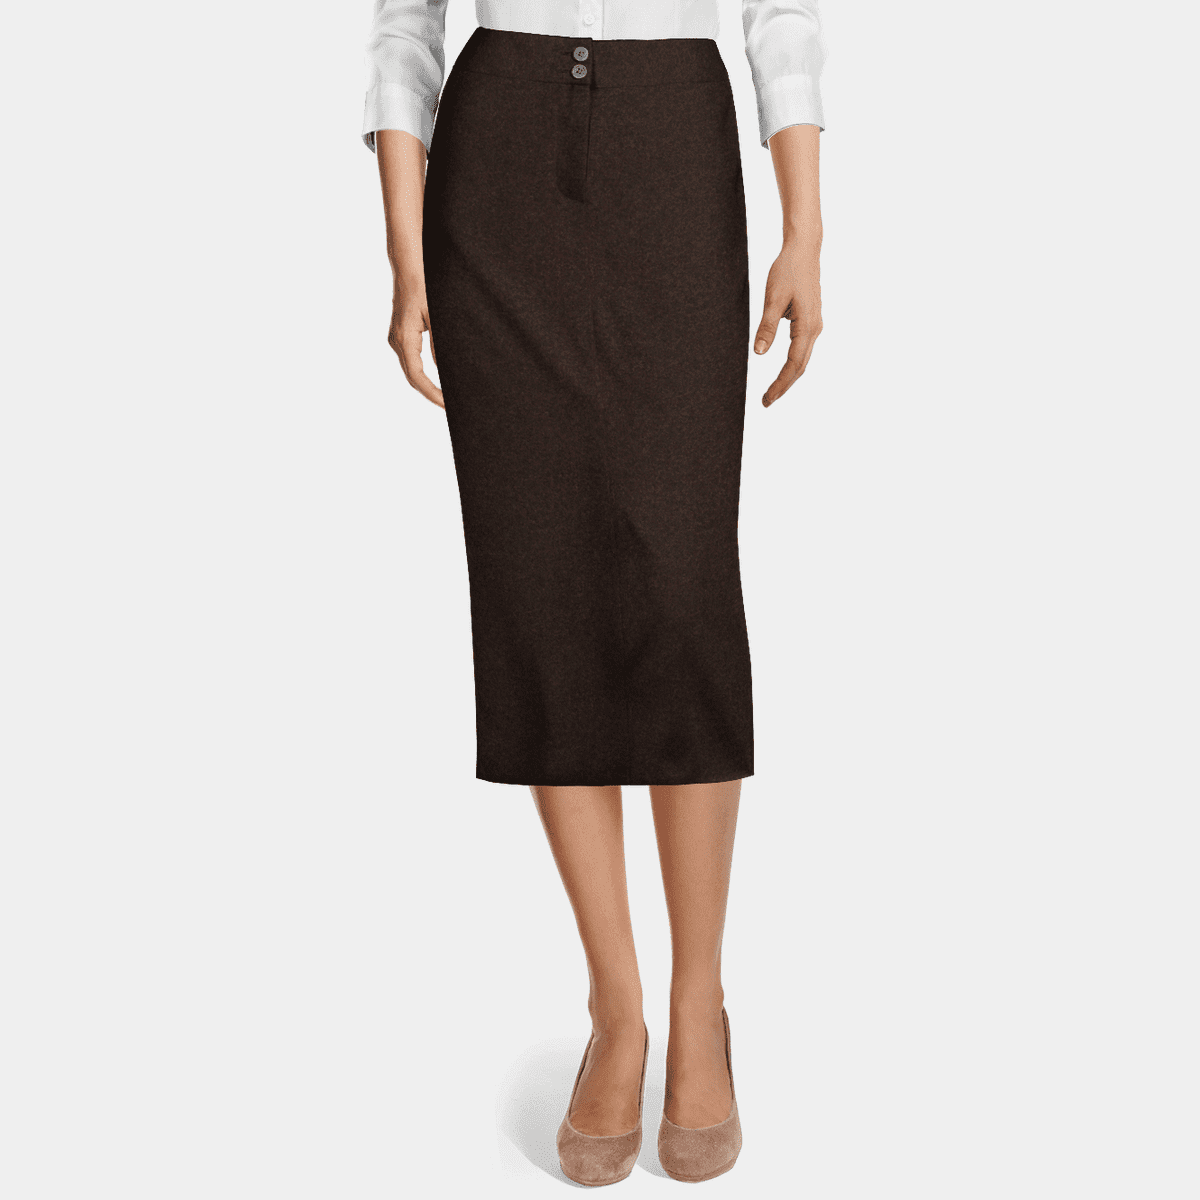 Kate Kasin Slim Fit Knee Length Skirt Stretchy Plus Size - Import It All